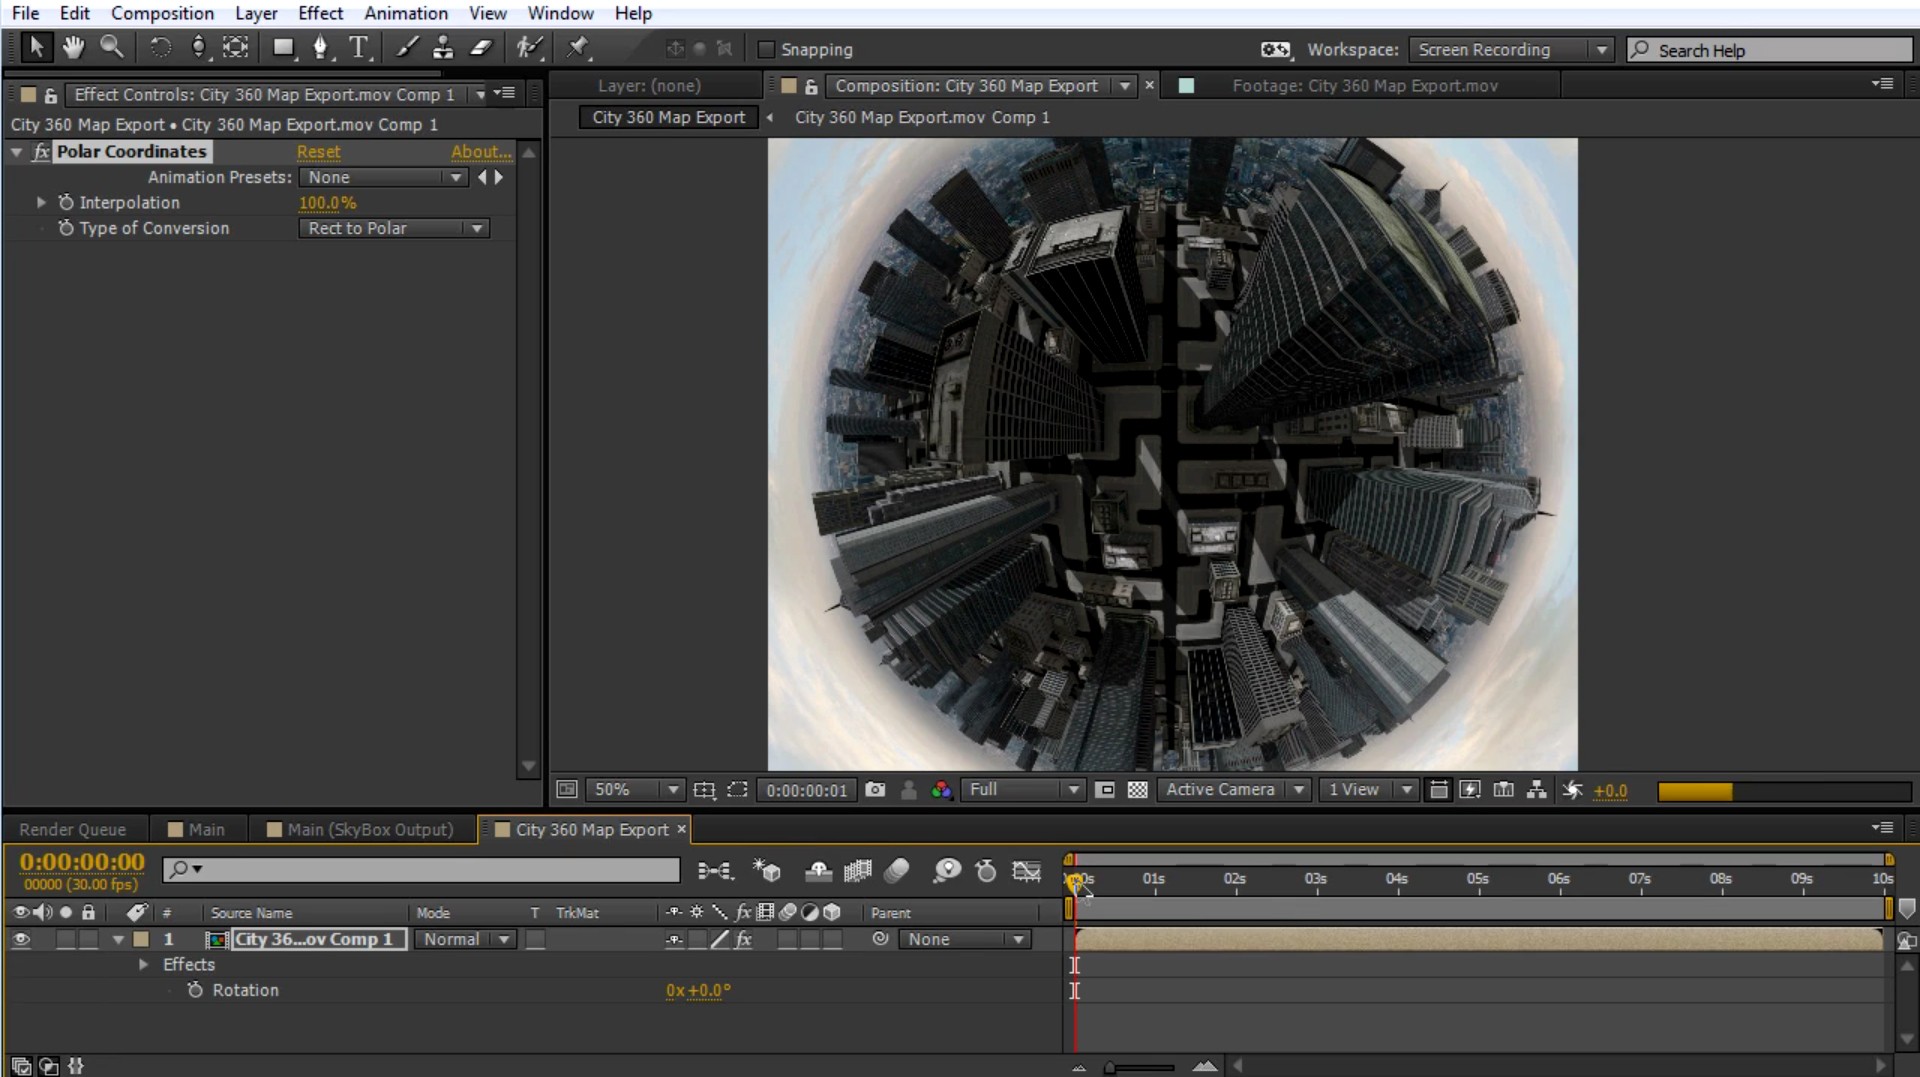 How to Create a Tiny Planet in After Effects | SkyBox Studio + Element 3D